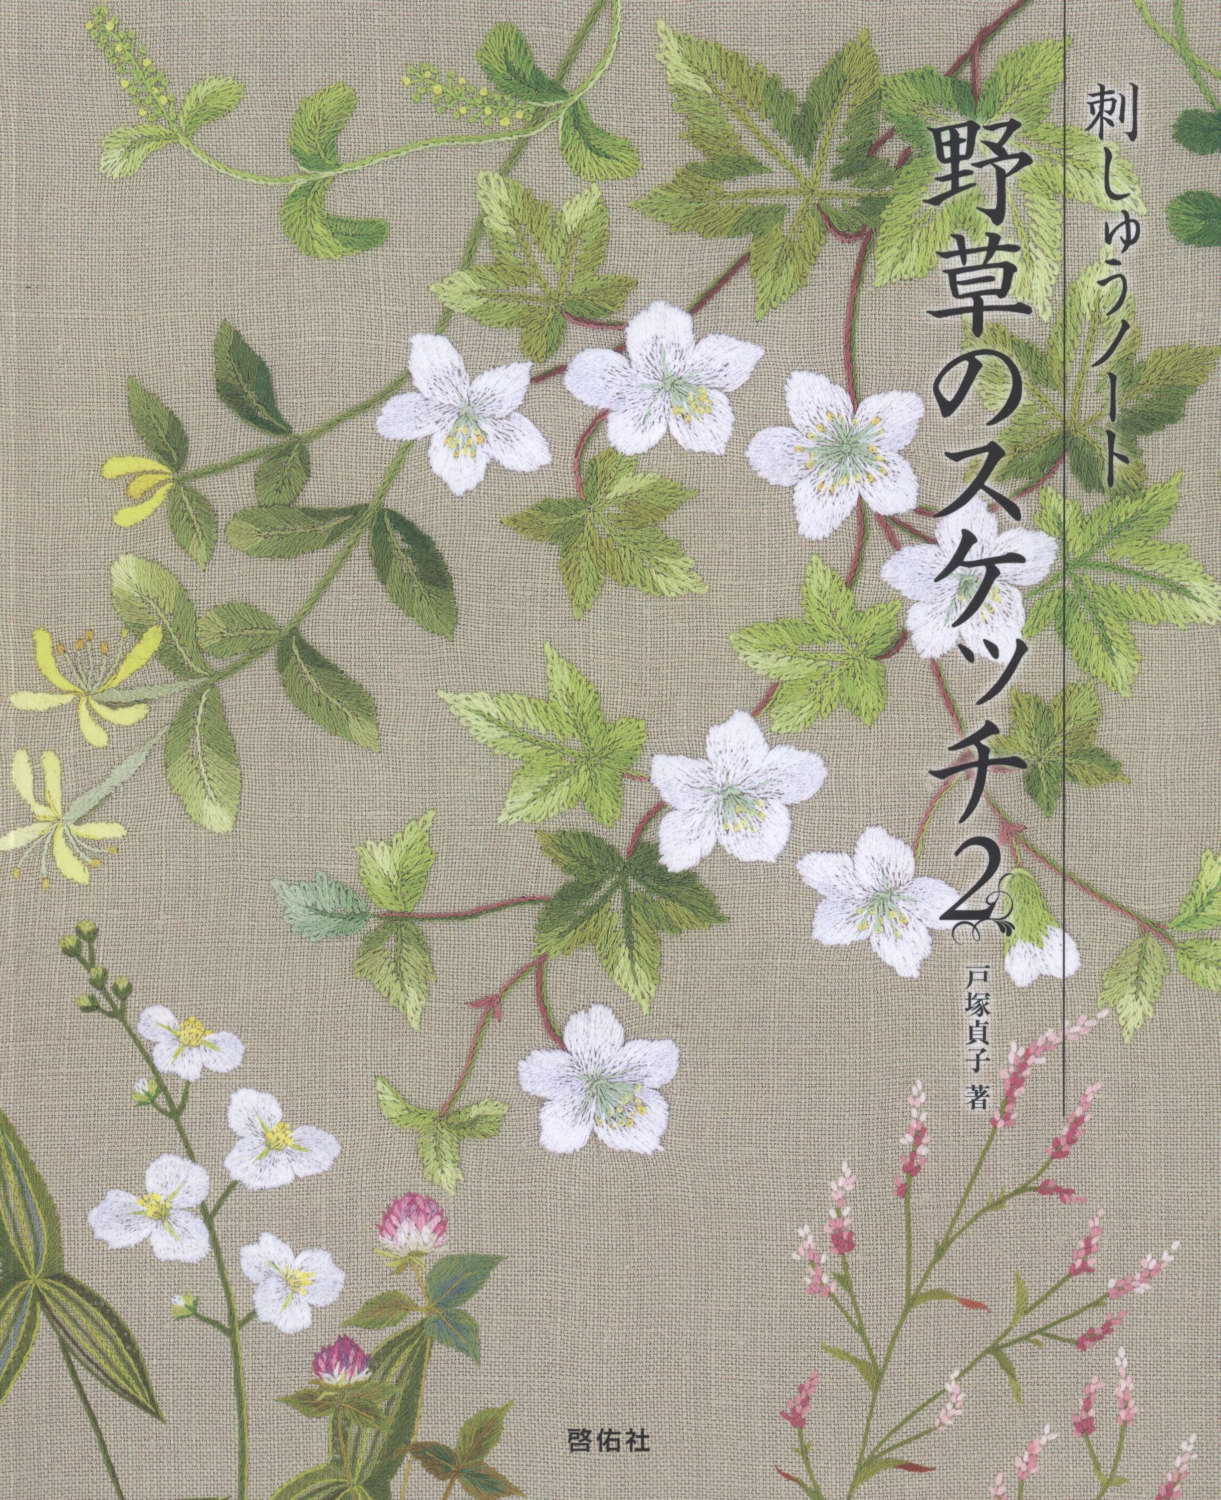 Japanese Embroidery Patterns 59 Embroidery Patterns Flower Embroidery Embroidery Pattern Botanical Japanese Embroidery Book Ebook Pdf Instant Download